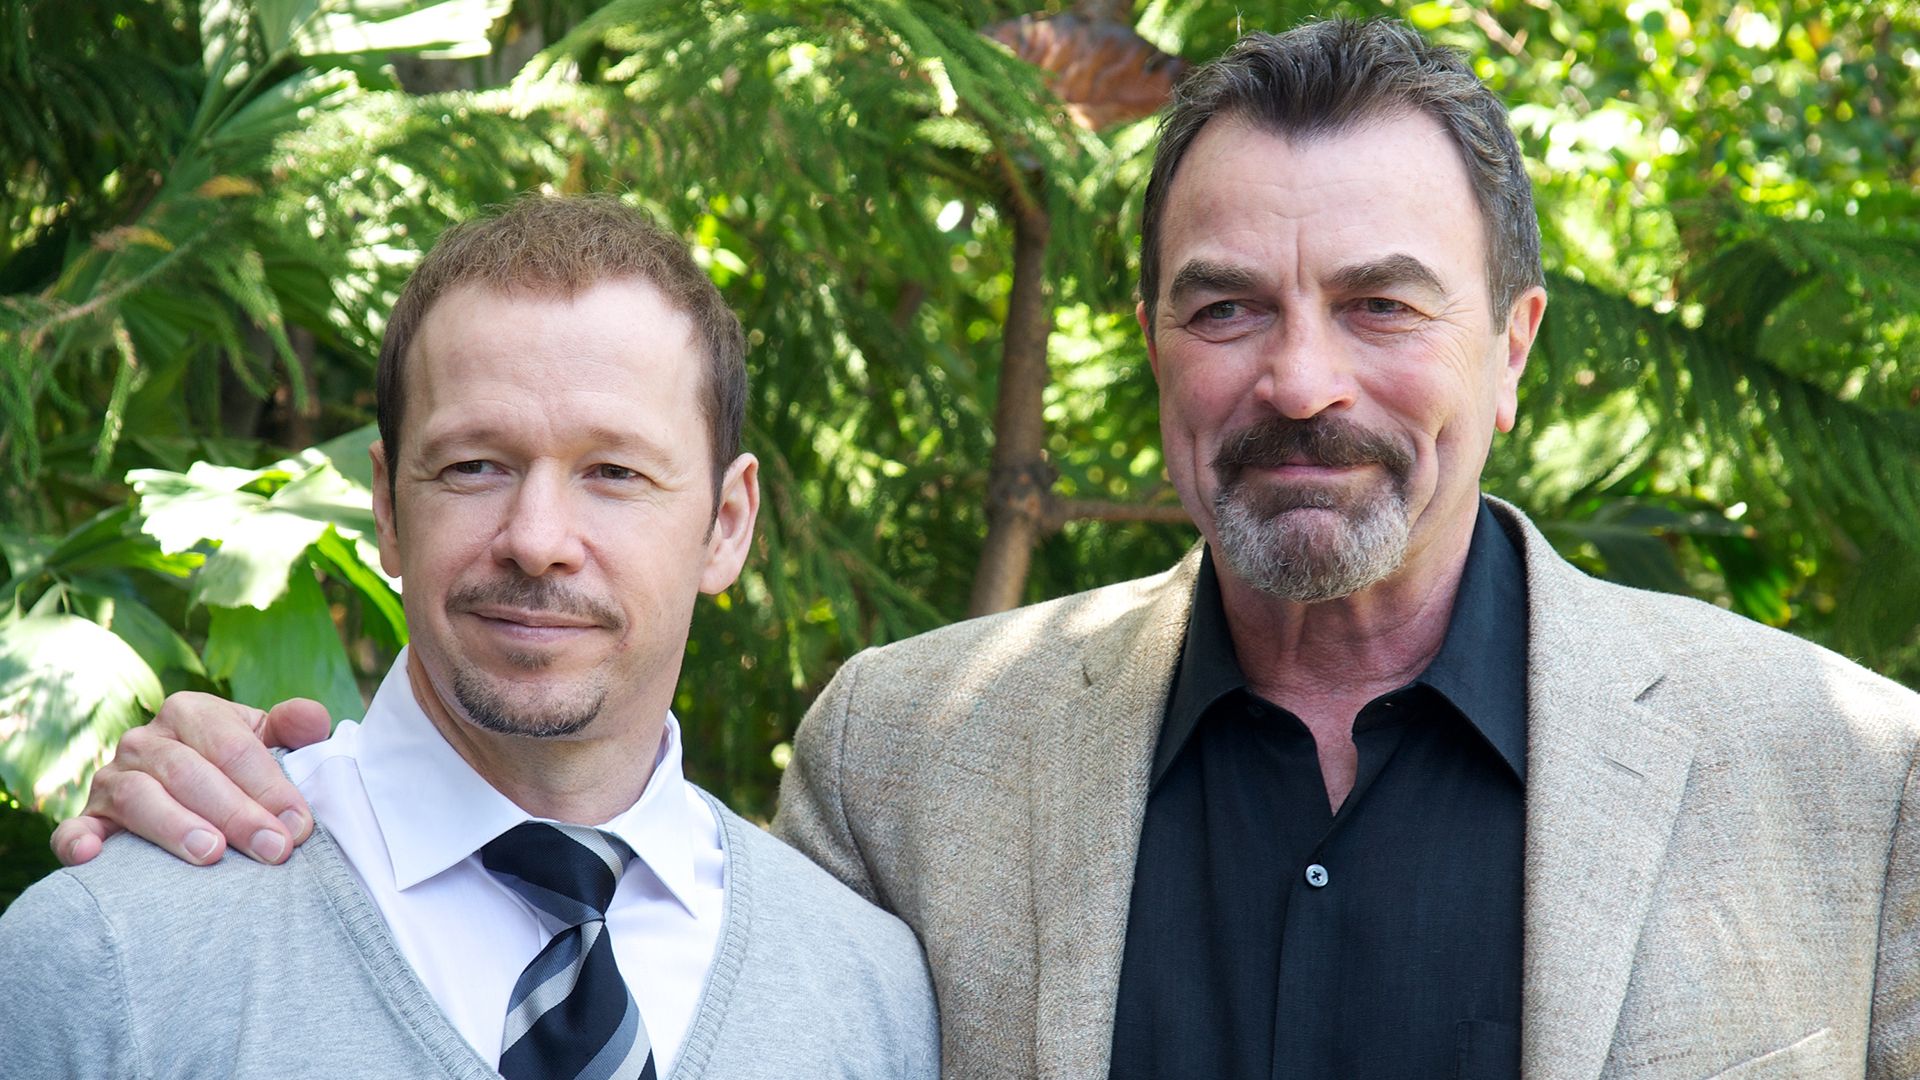 Inside Donnie Wahlberg's sweet bond with TV 'dad' Tom Selleck